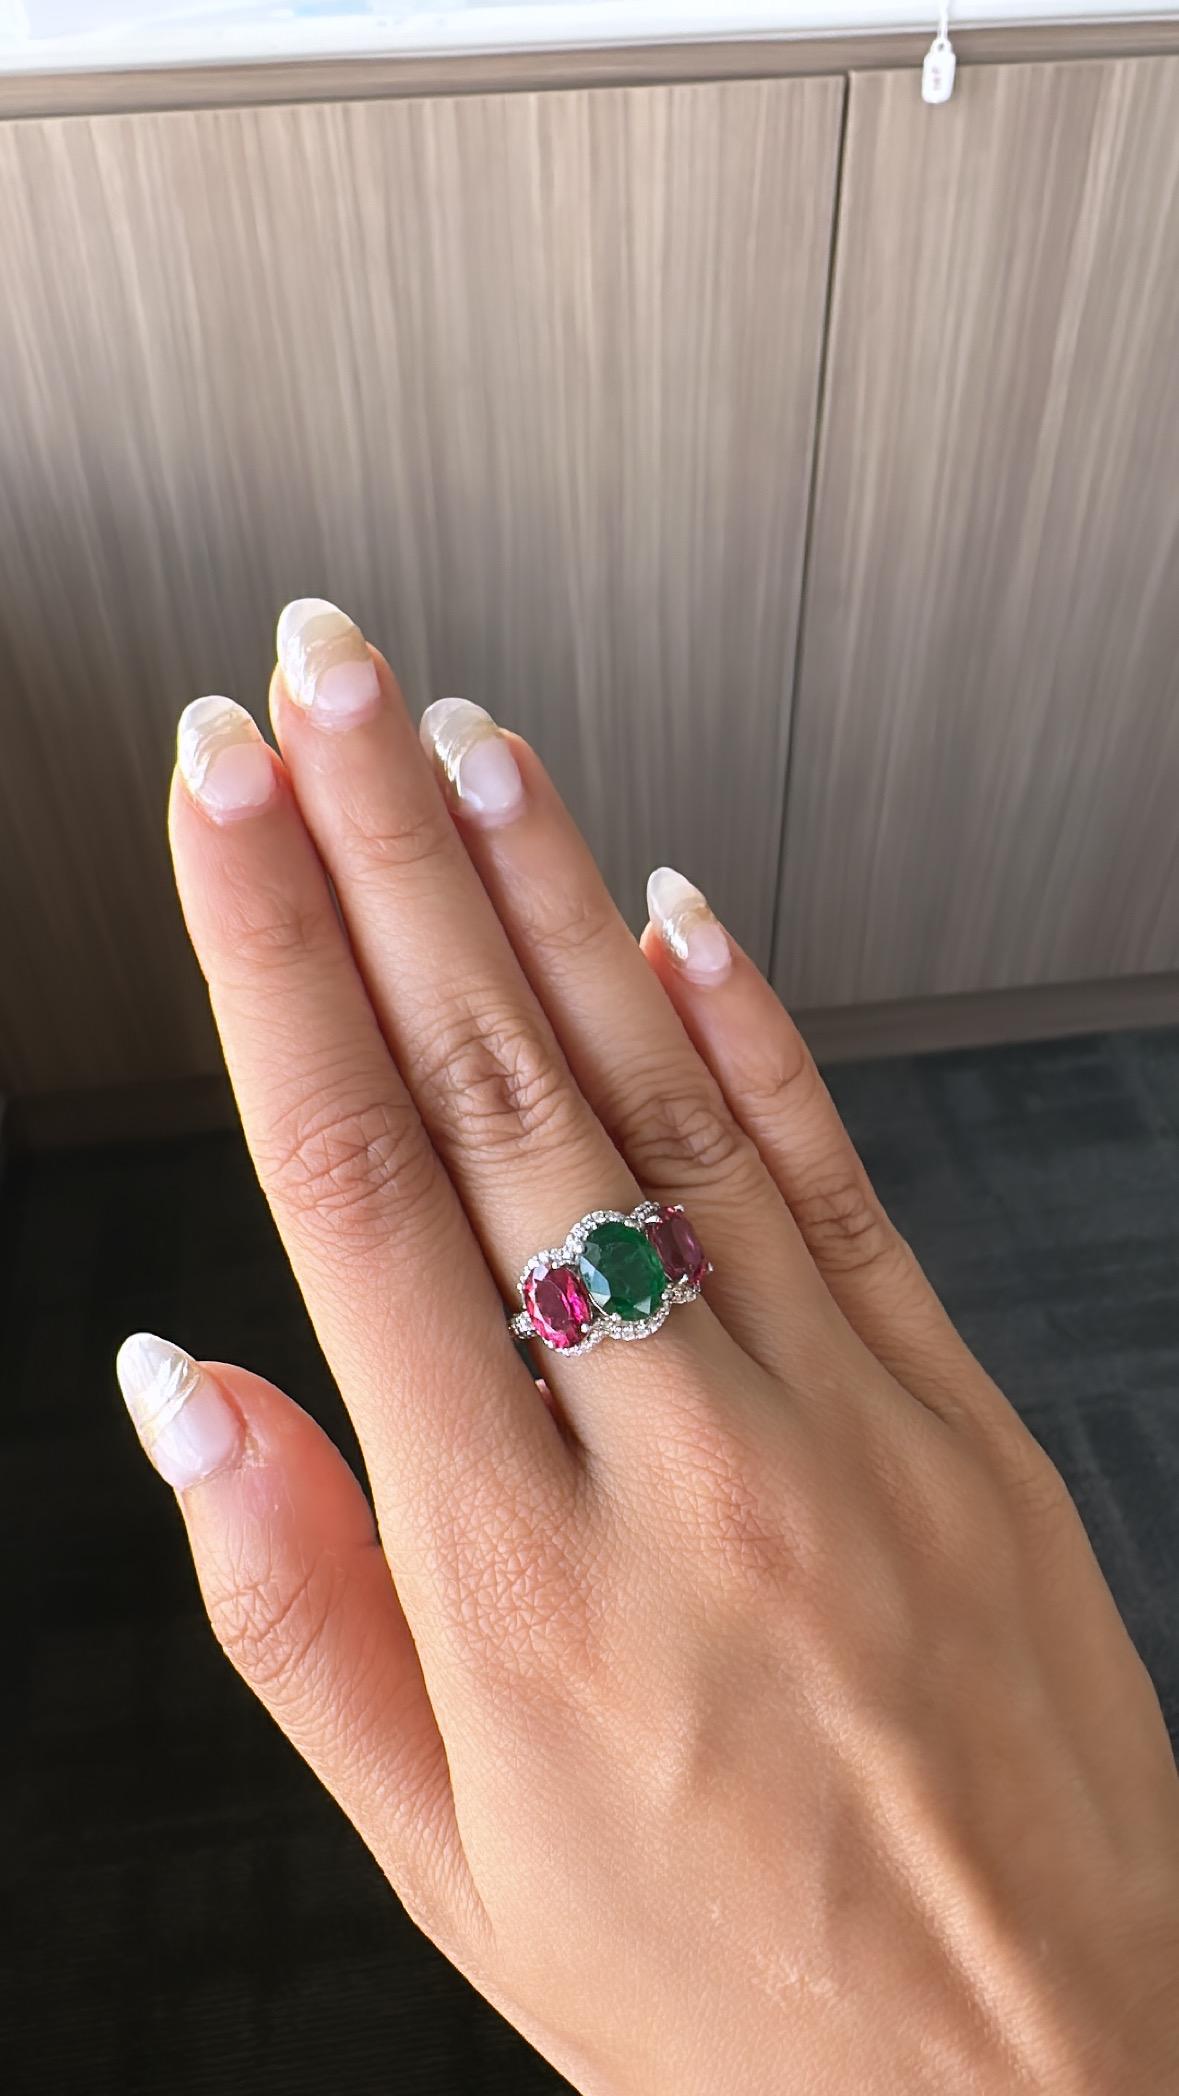 A very gorgeous and one of a kind, Emerald & Rubelite Band / Cocktail Ring set in 18K White Gold 
& Diamonds. The weight of the Emerald is 2.16 carats. The Emerald is completely natural, without any treatment and is of Zambian origin. The weight of